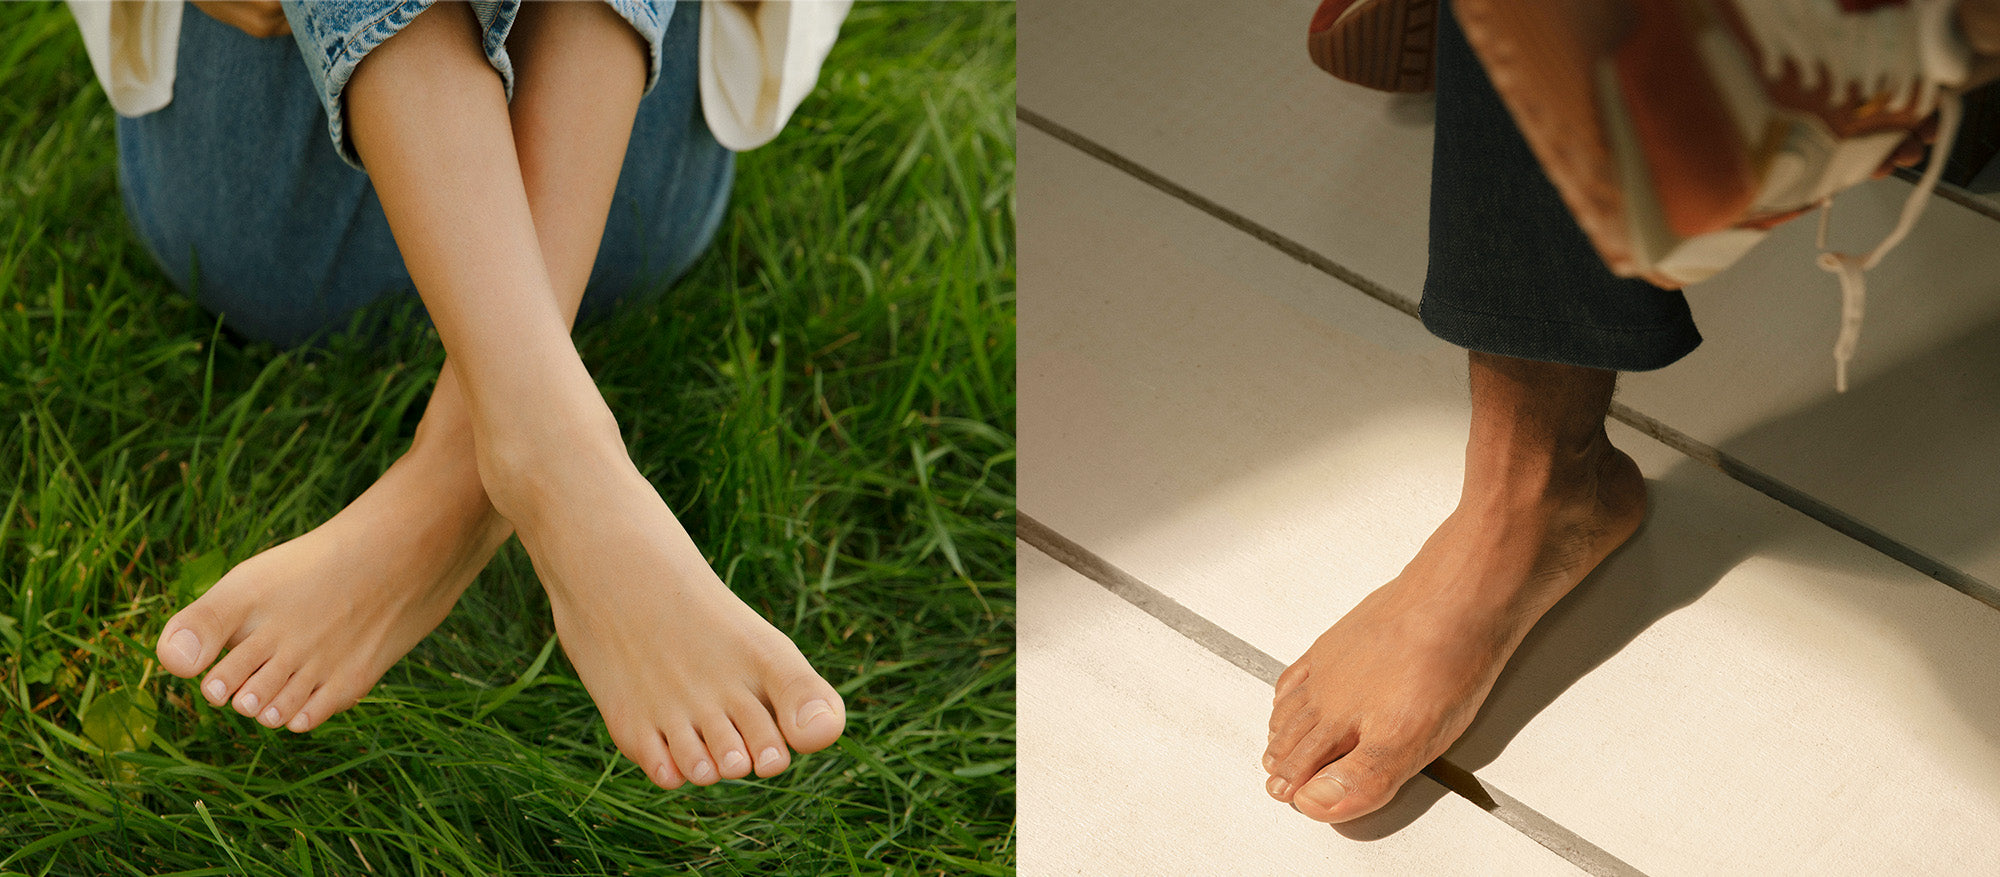 A photo of a healthy pair of bare feet in the grass next to a photo of someone barefoot putting on a sneaker